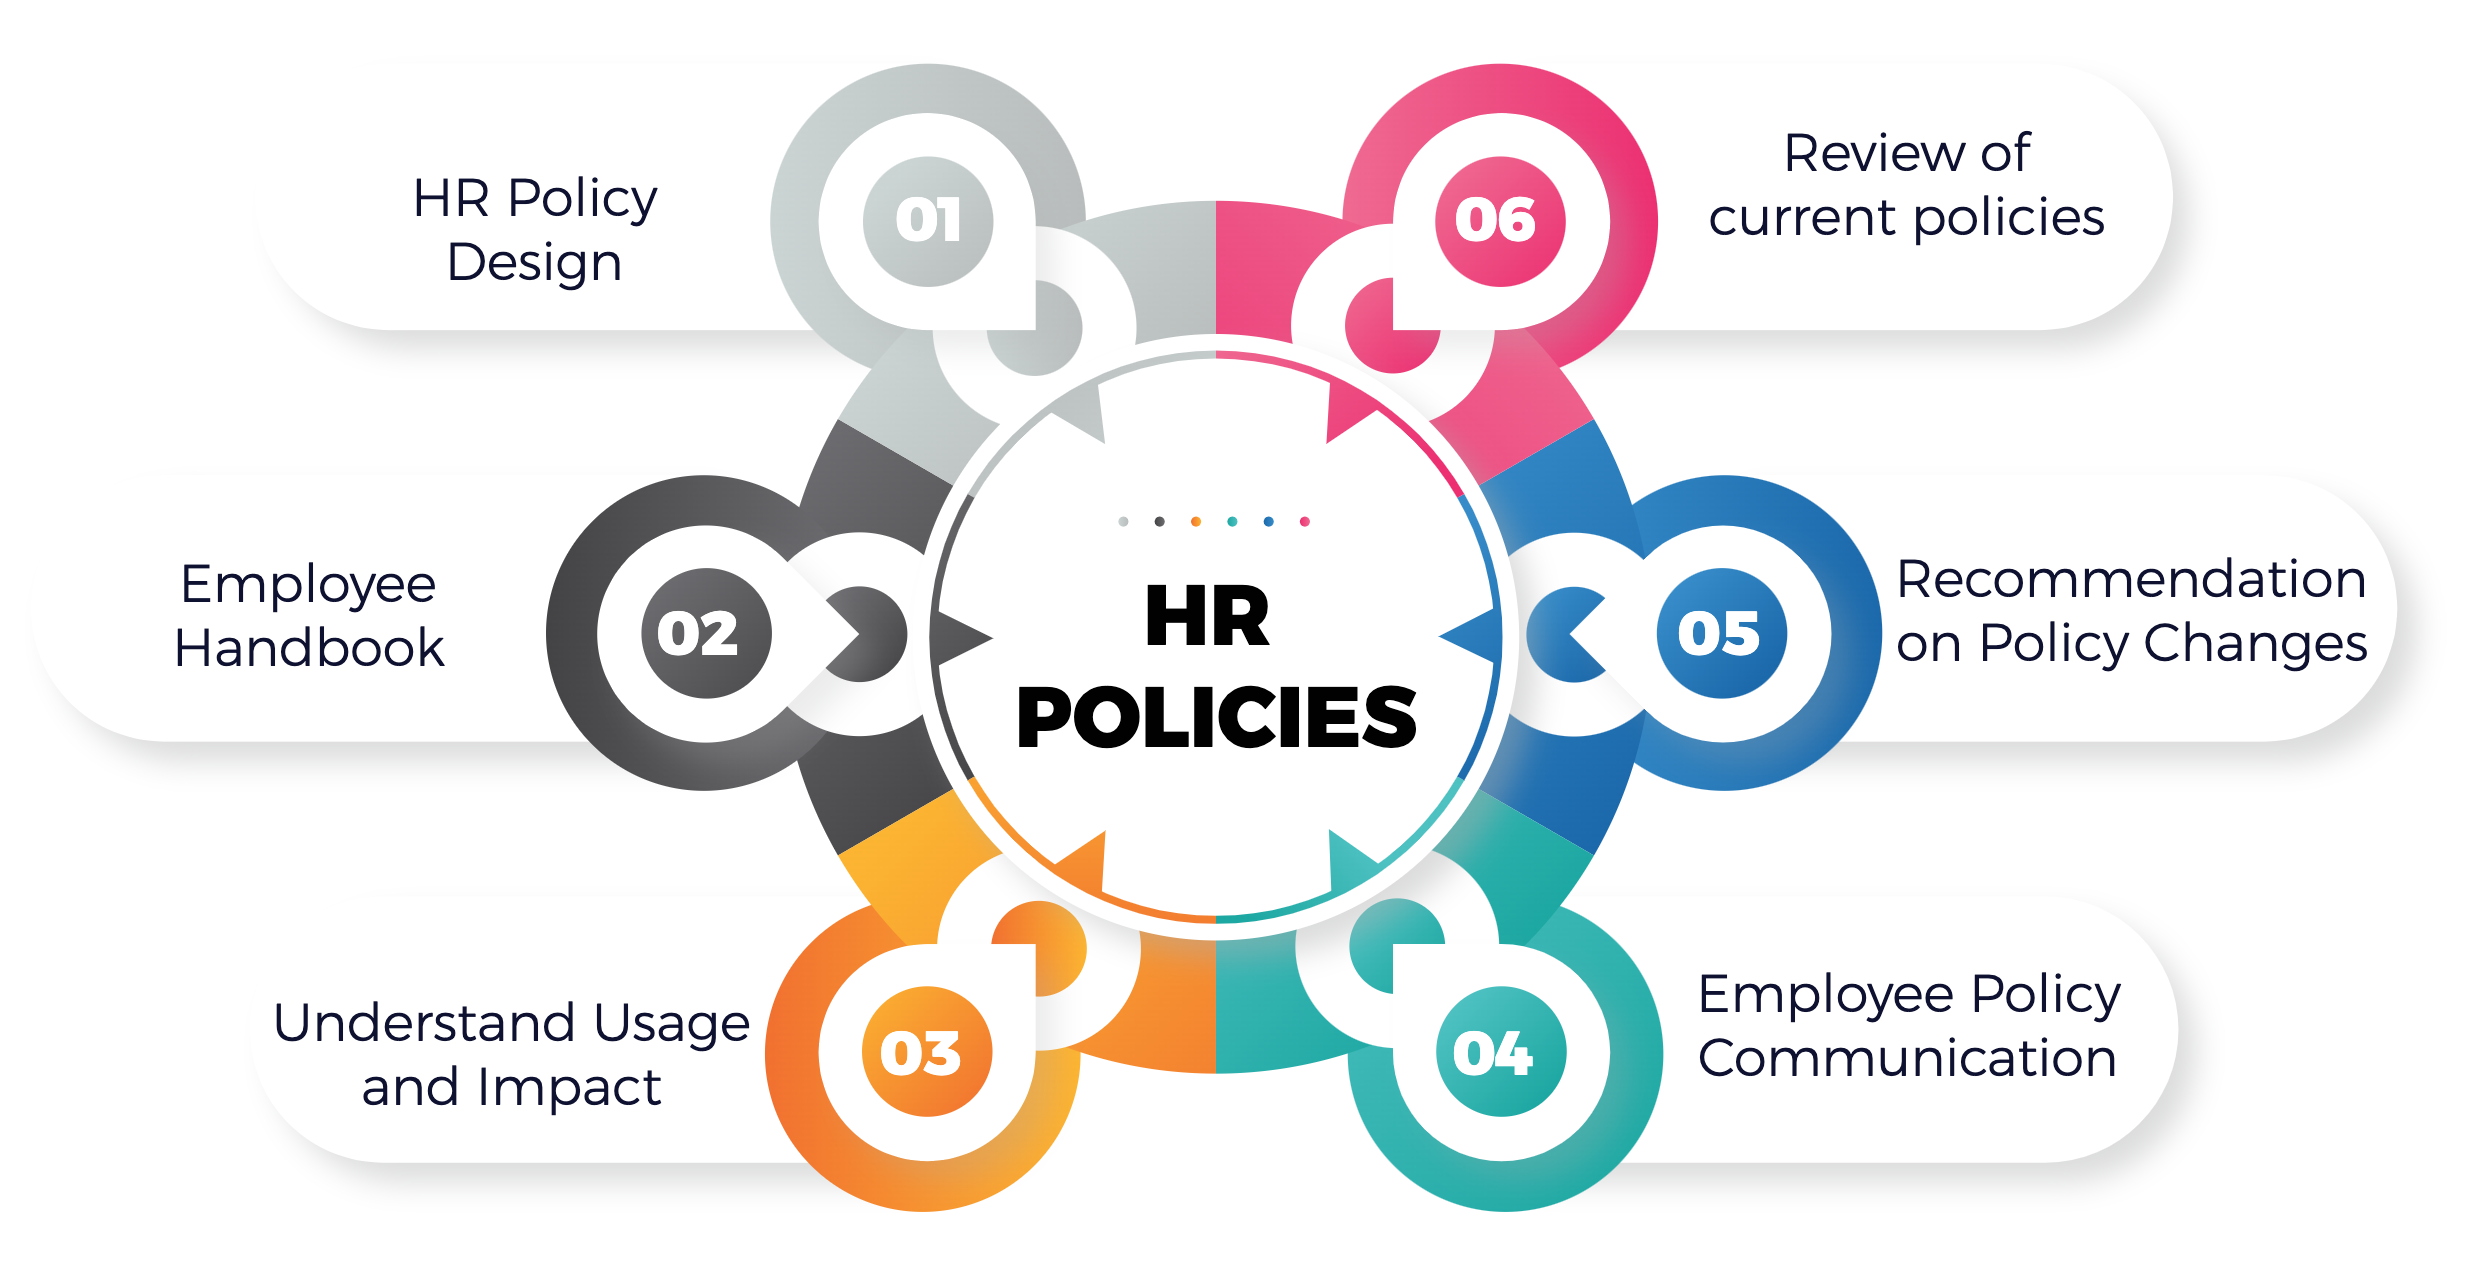 Shrofile HR policies - Formation, Communication and Deployment